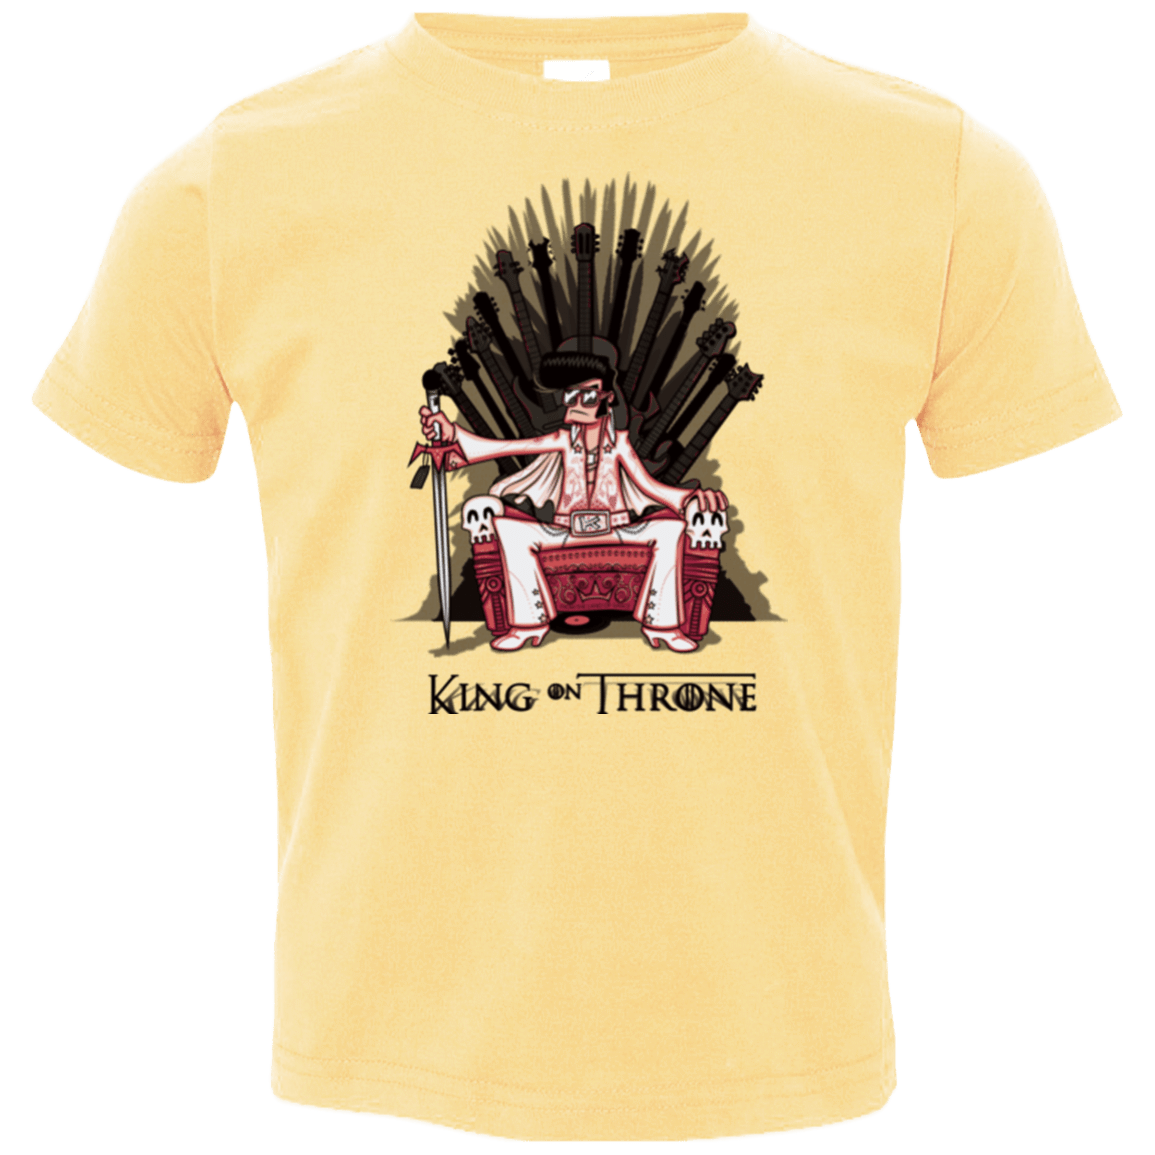 T-Shirts Butter / 2T King on Throne Toddler Premium T-Shirt